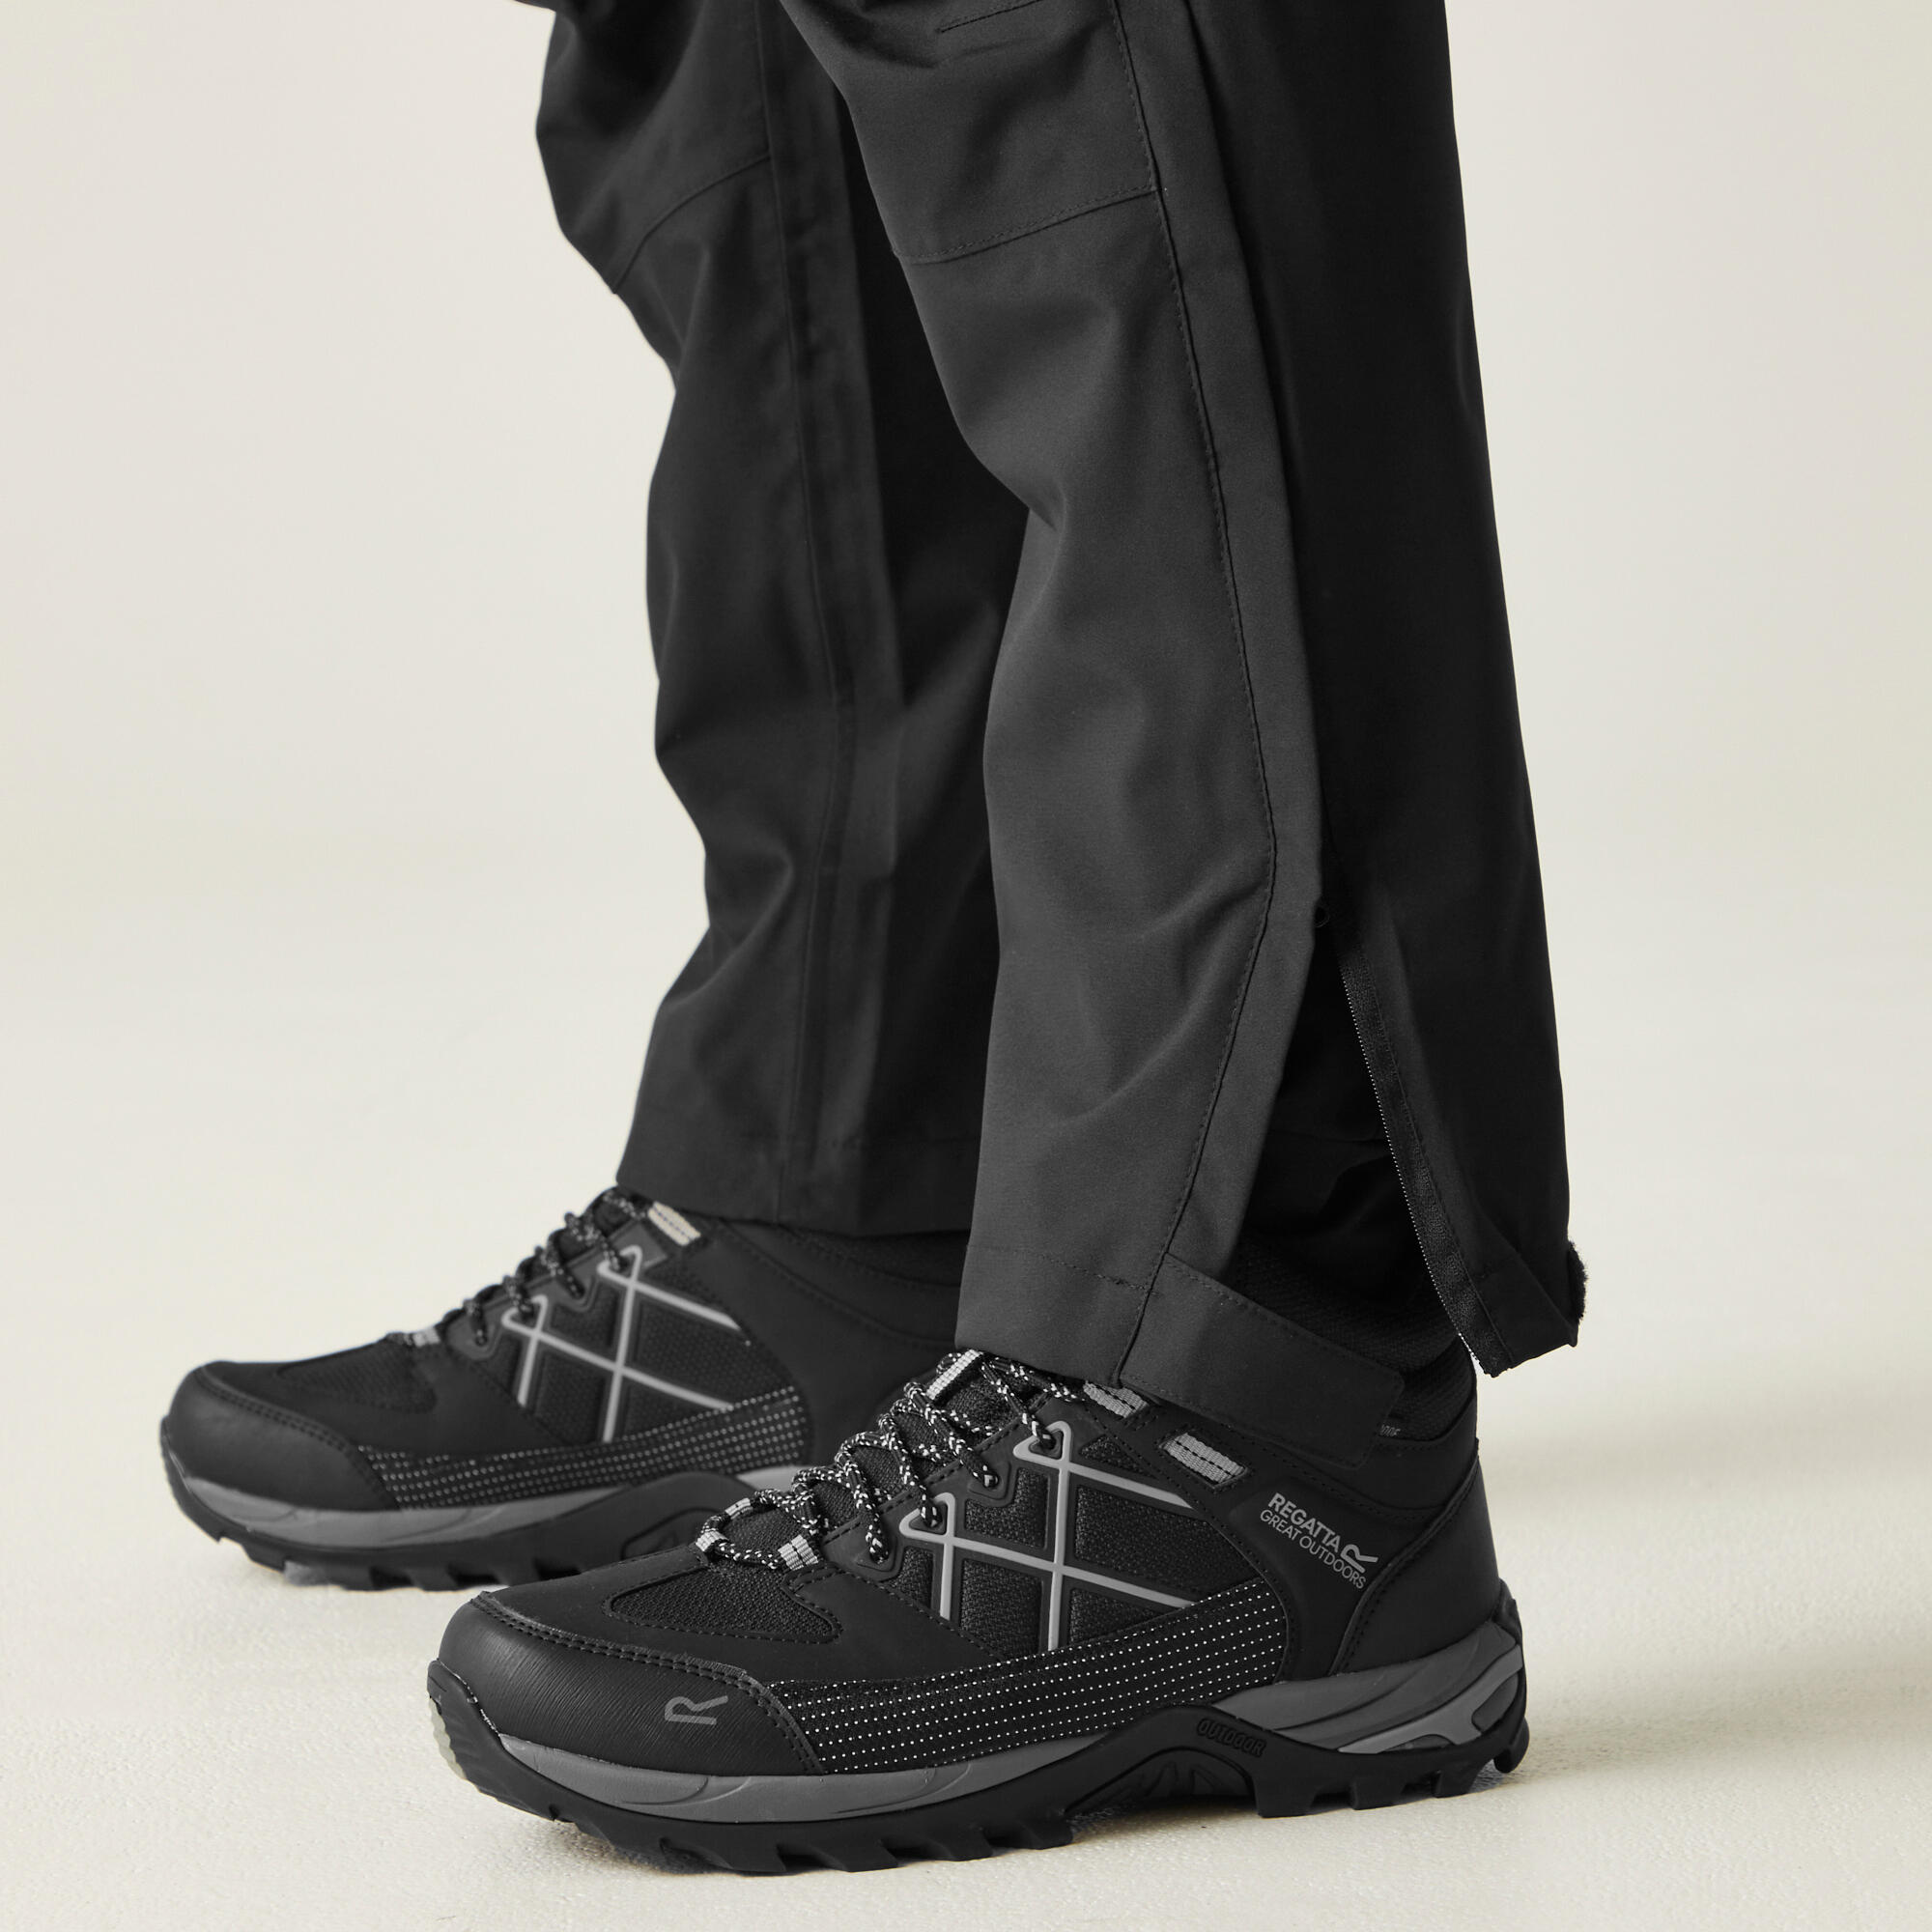 Highton Stretch Men's Hiking Overtrousers - Black 4/6